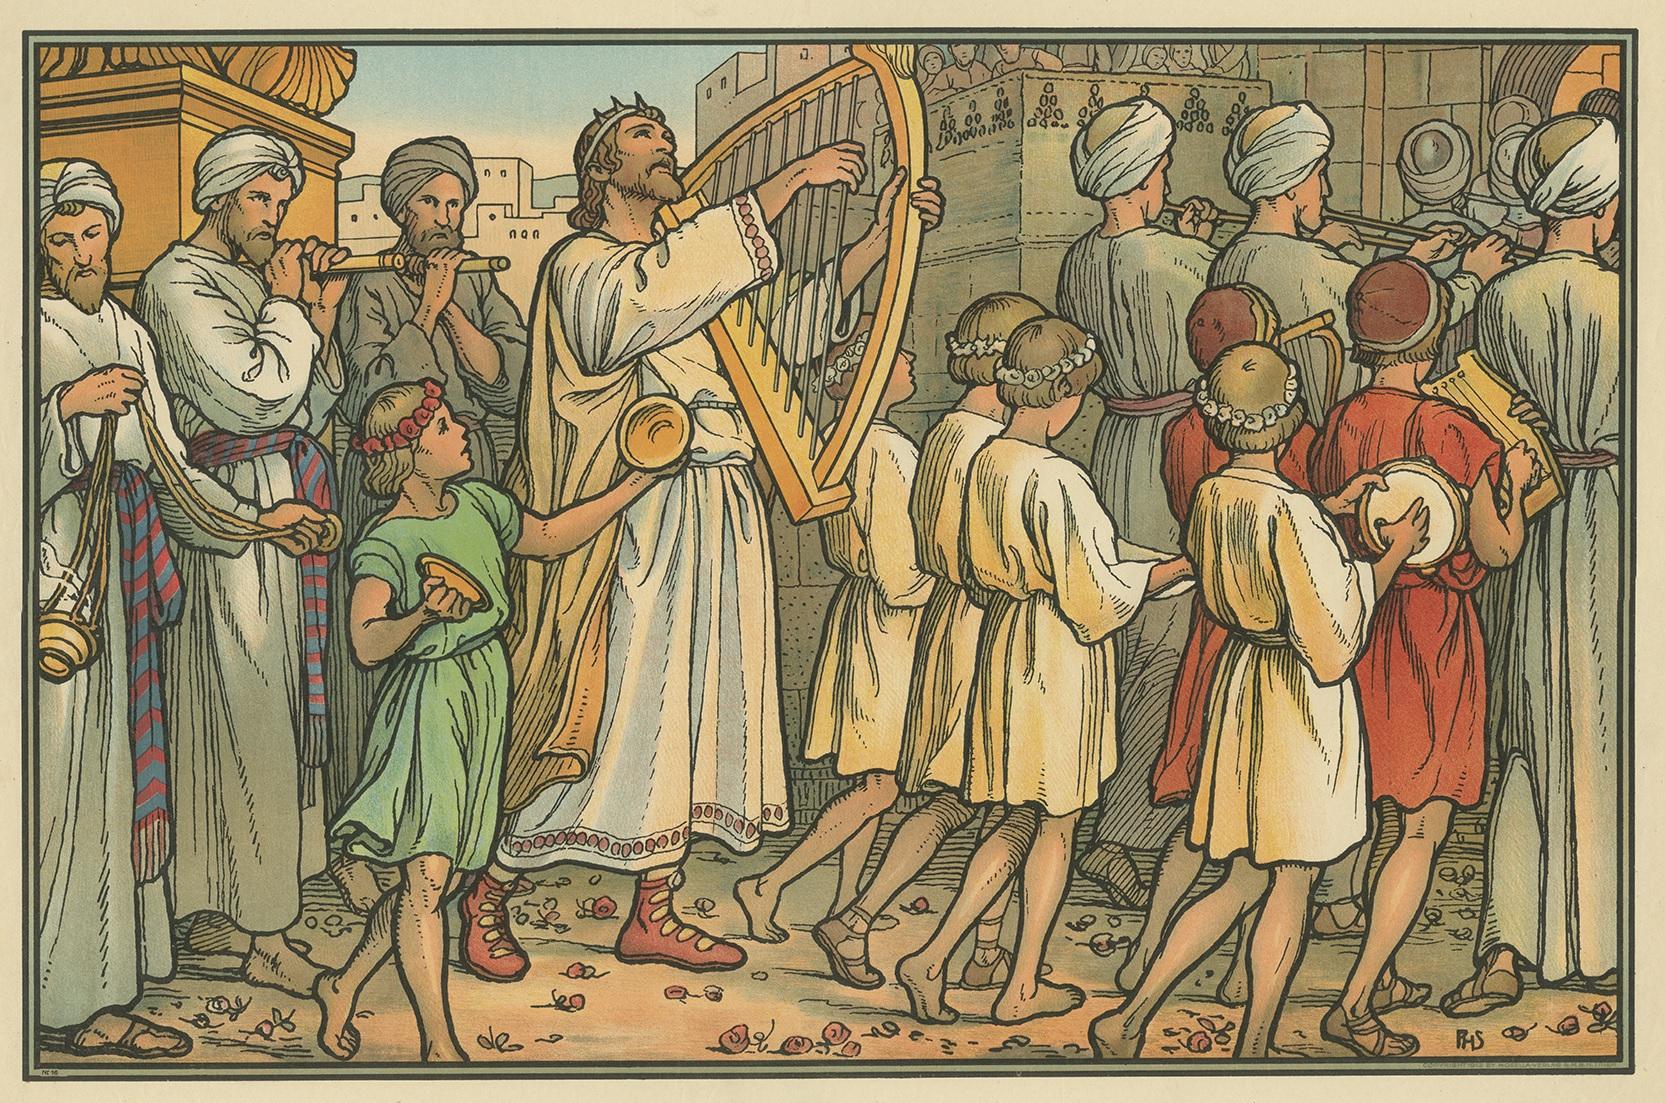 Large antique print of David Dancing Before the Ark. Published by Mosella-Verlag, 1913. This print originates from a series titled 'Kathol. Schulbibelwerk von Dr. Ecker'.